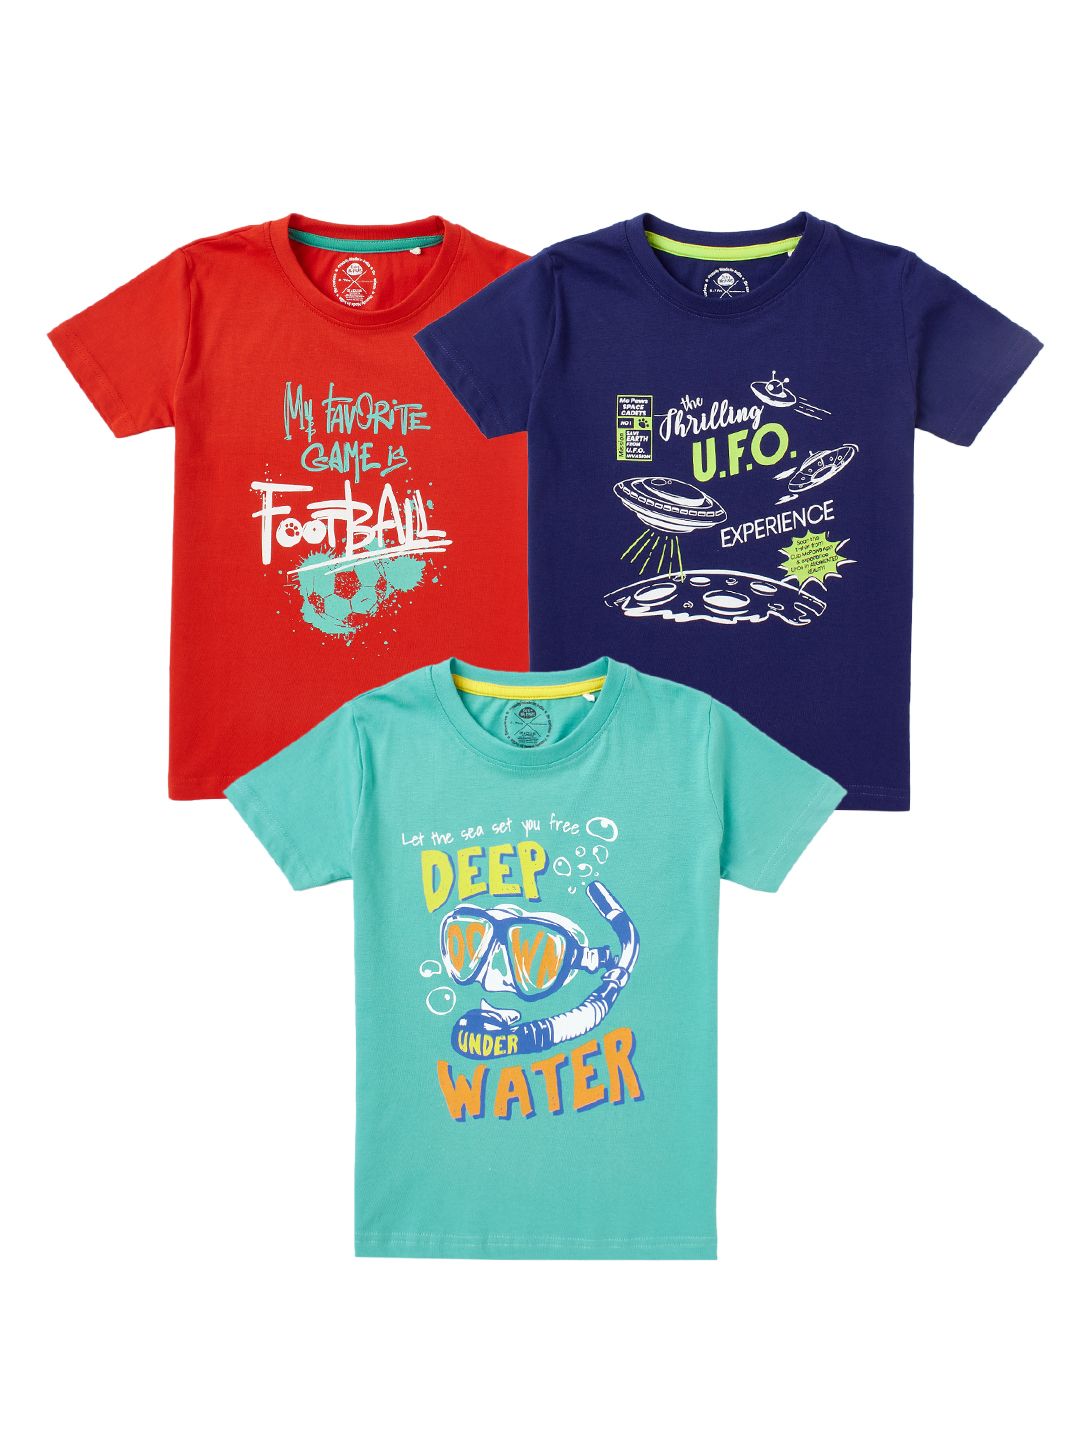 Boys Pack of 3 T-Shirts Half Sleeves,(includes 1 Magic T-shirt)